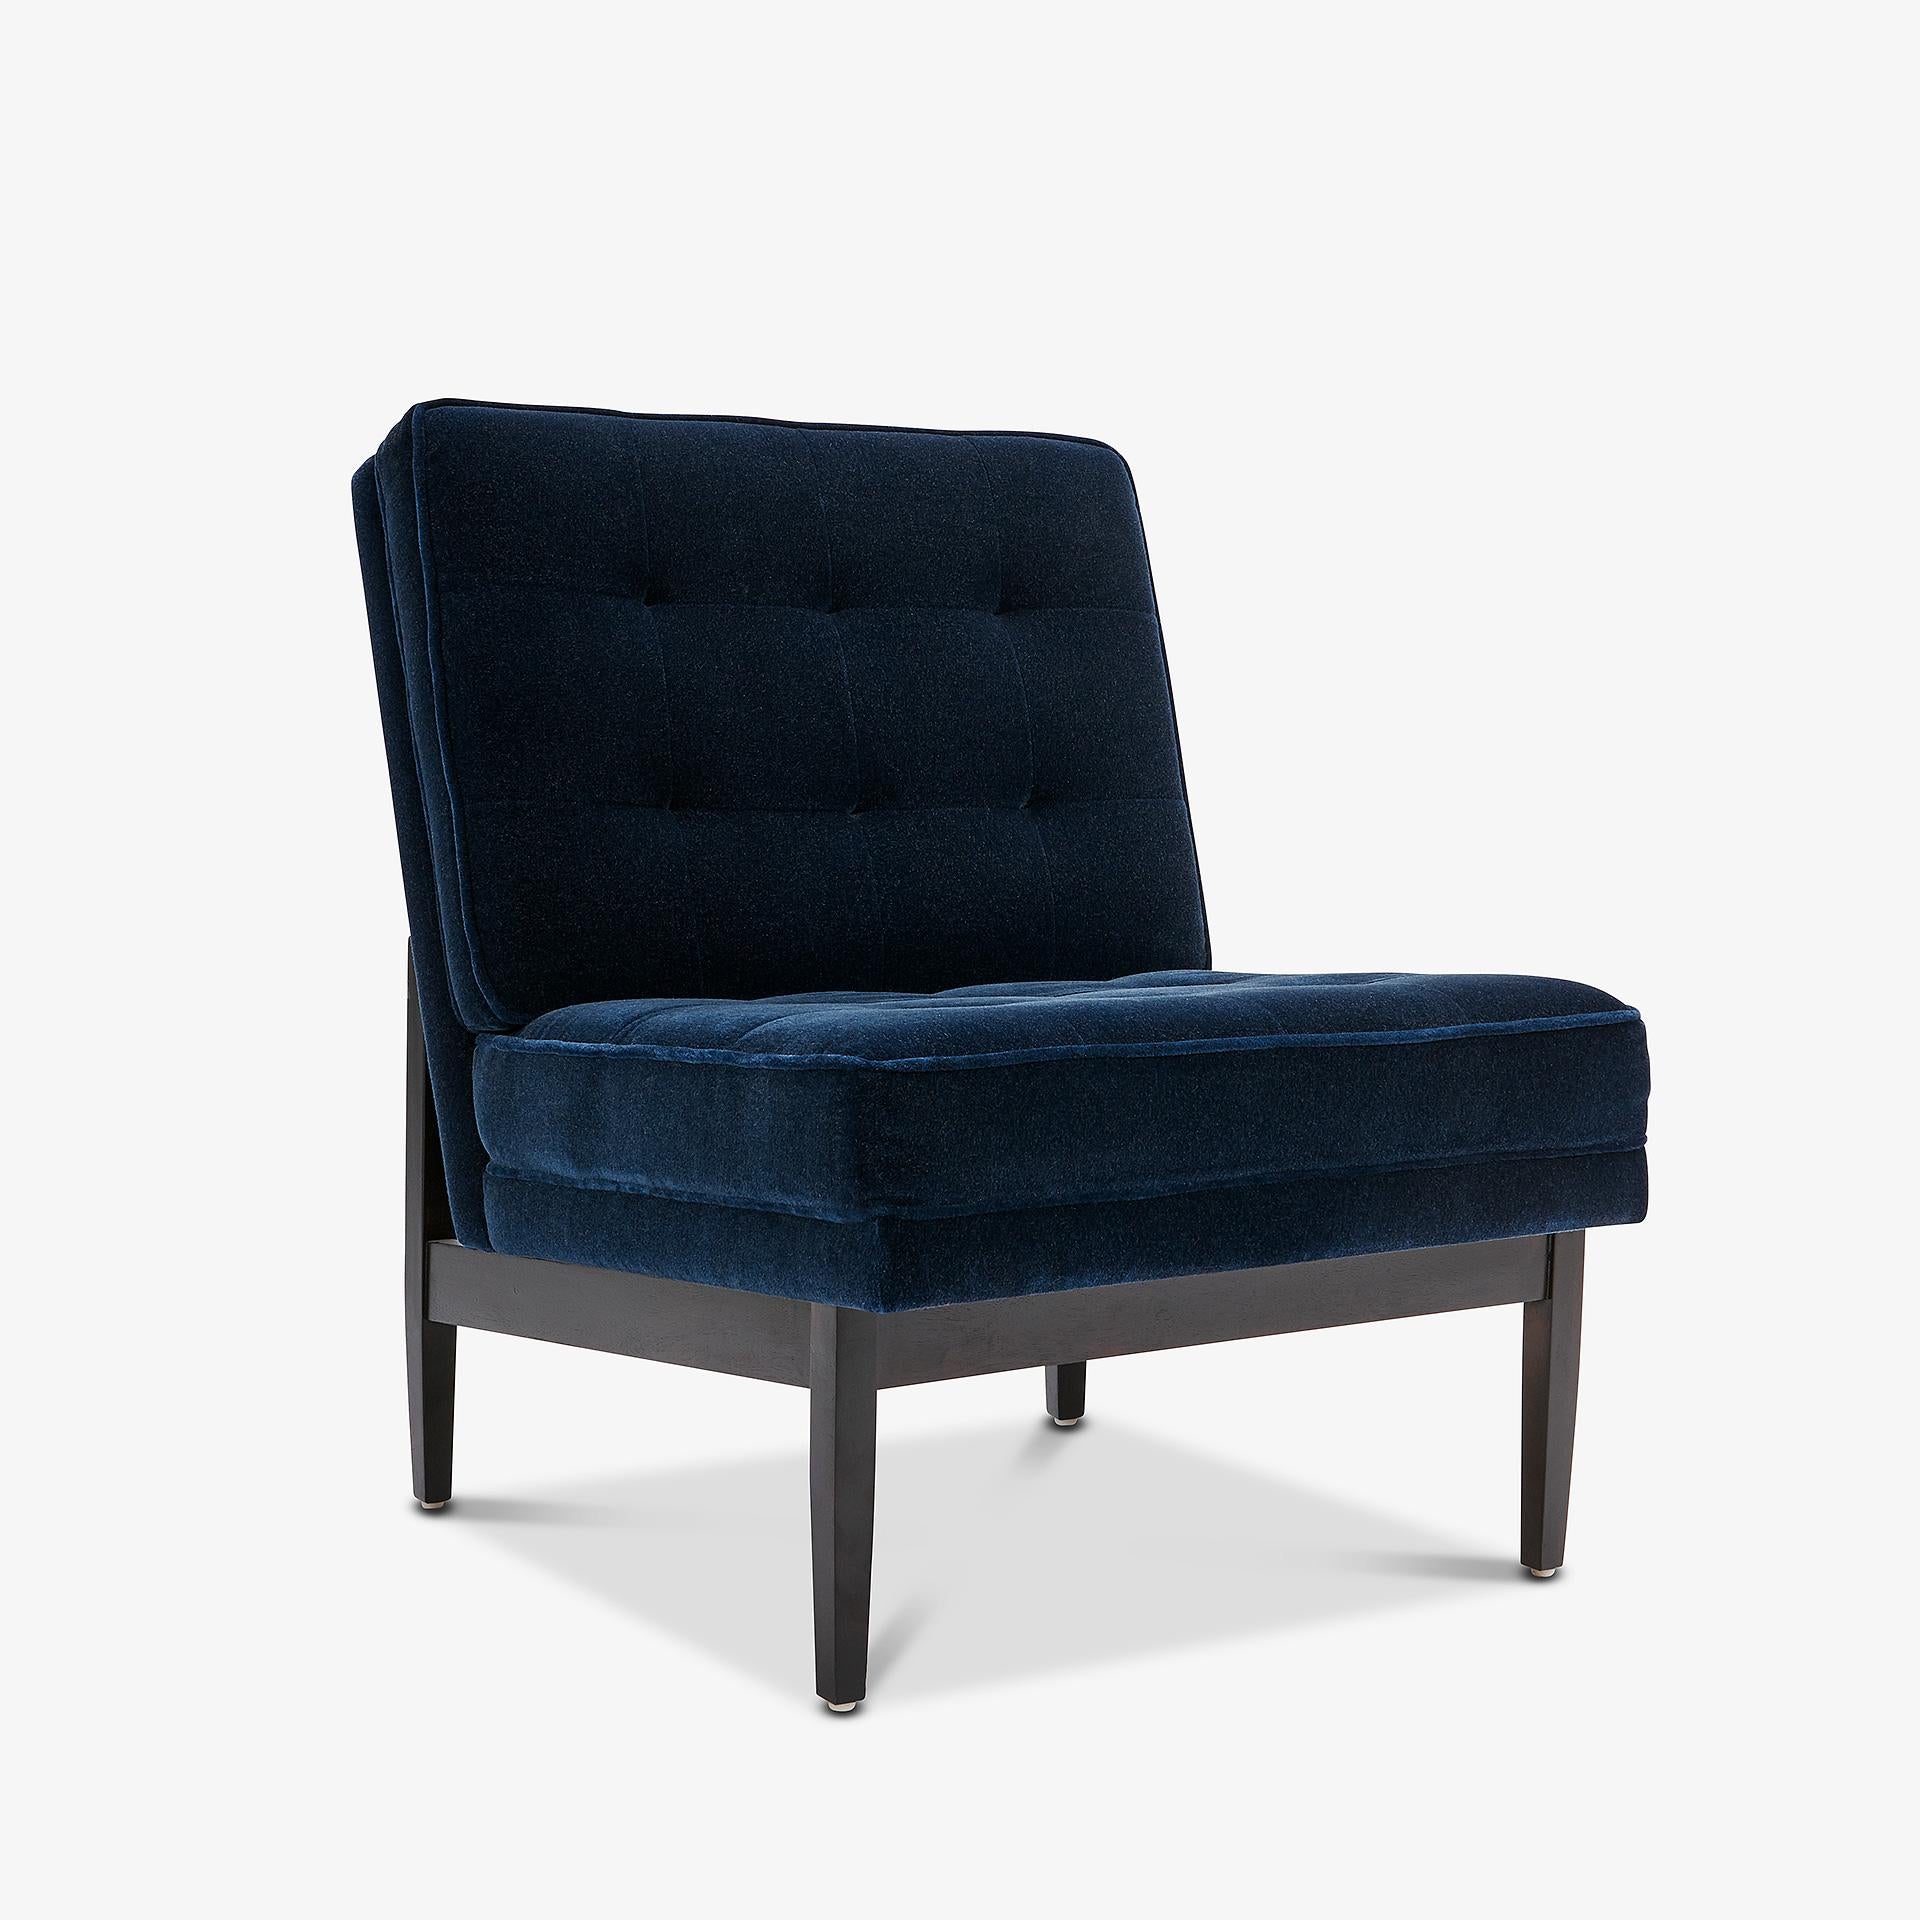 grm Bespoke V custom lounger. These versatile lounge chairs can work placed separately or together. Floor sample set of four upholstered in a thick & luxurious prismatic blue mohair. Ebonized black maple wood base. Tufted seat and back. 

The